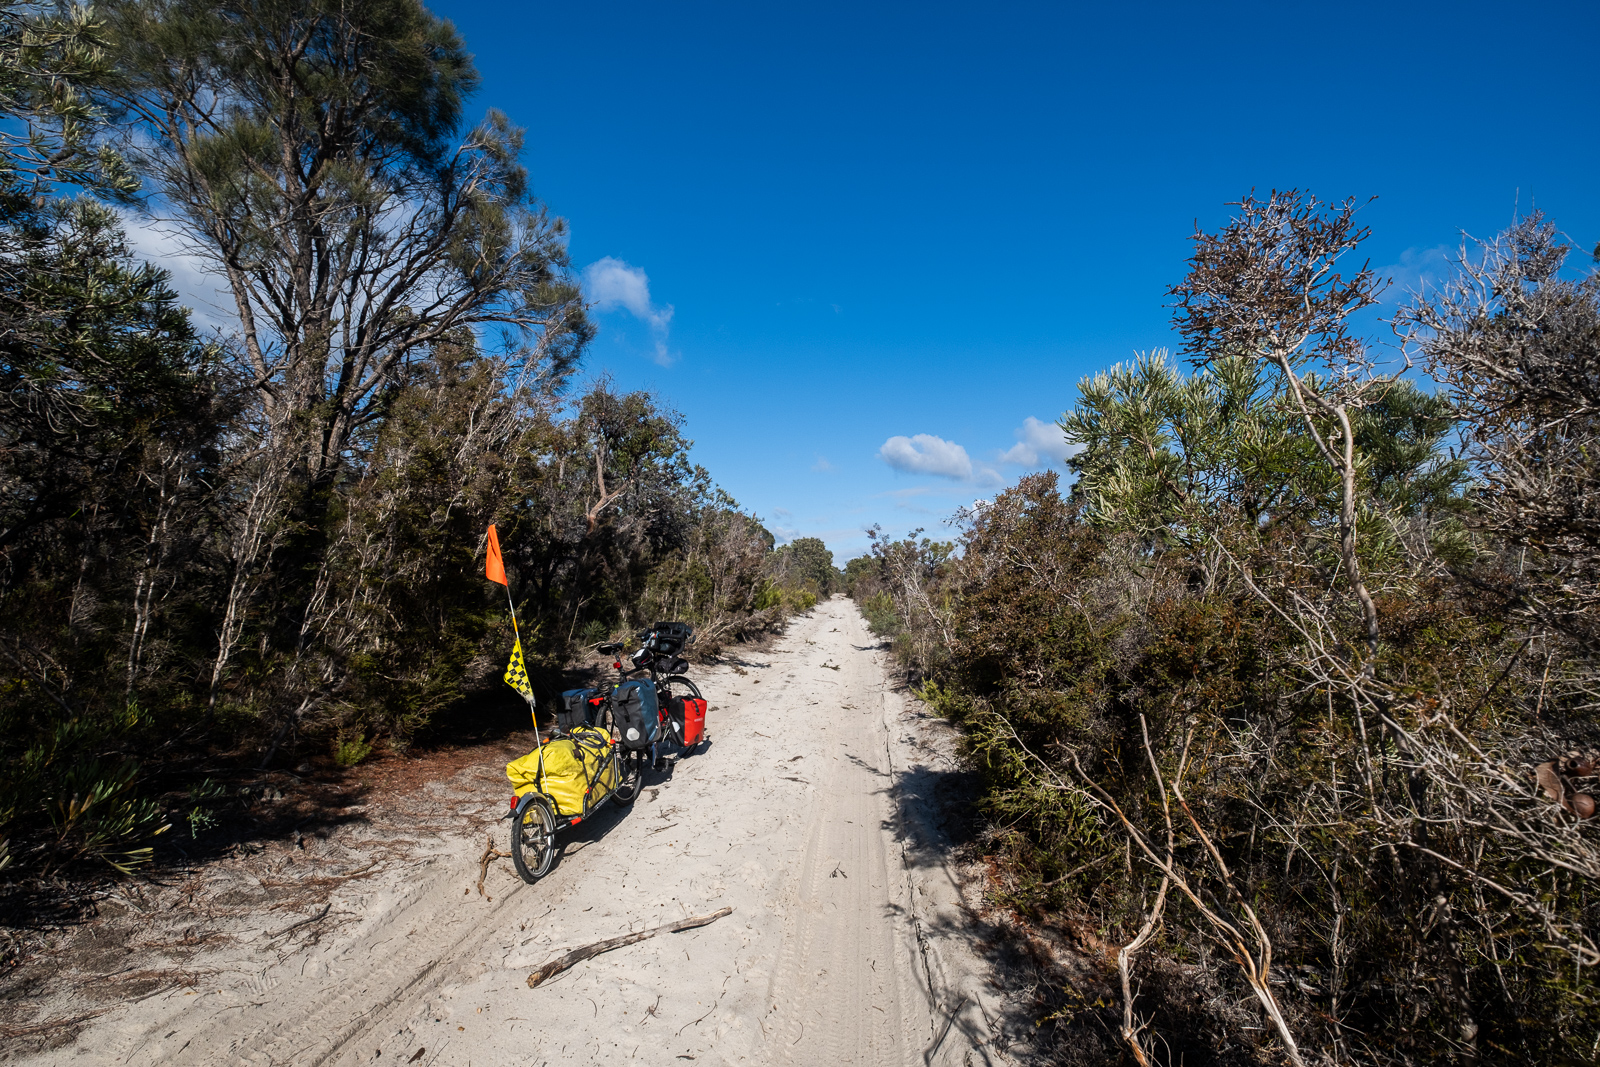  The road started becoming narrow and sandy, making it difficult to ride a heavy bike.&nbsp;    